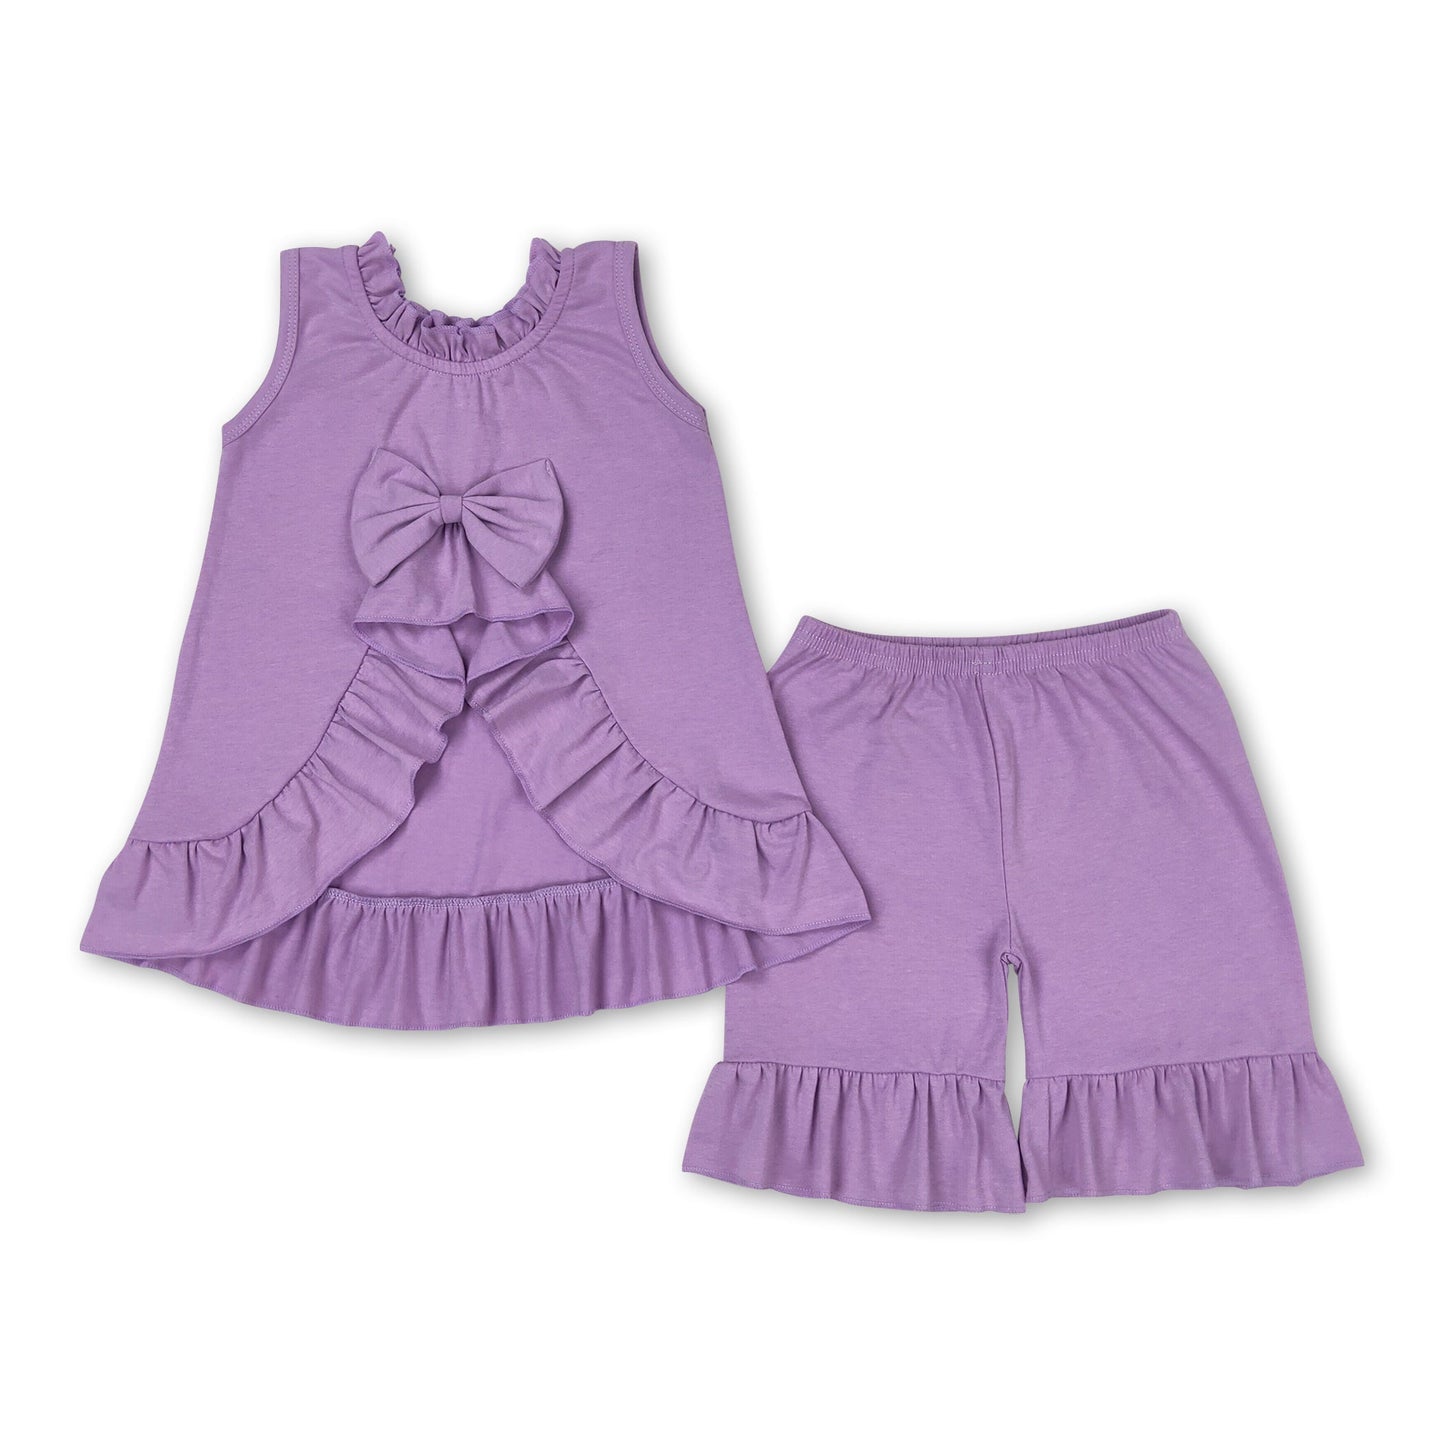 Lavender cotton sleeveless bow backless girls summer outfits